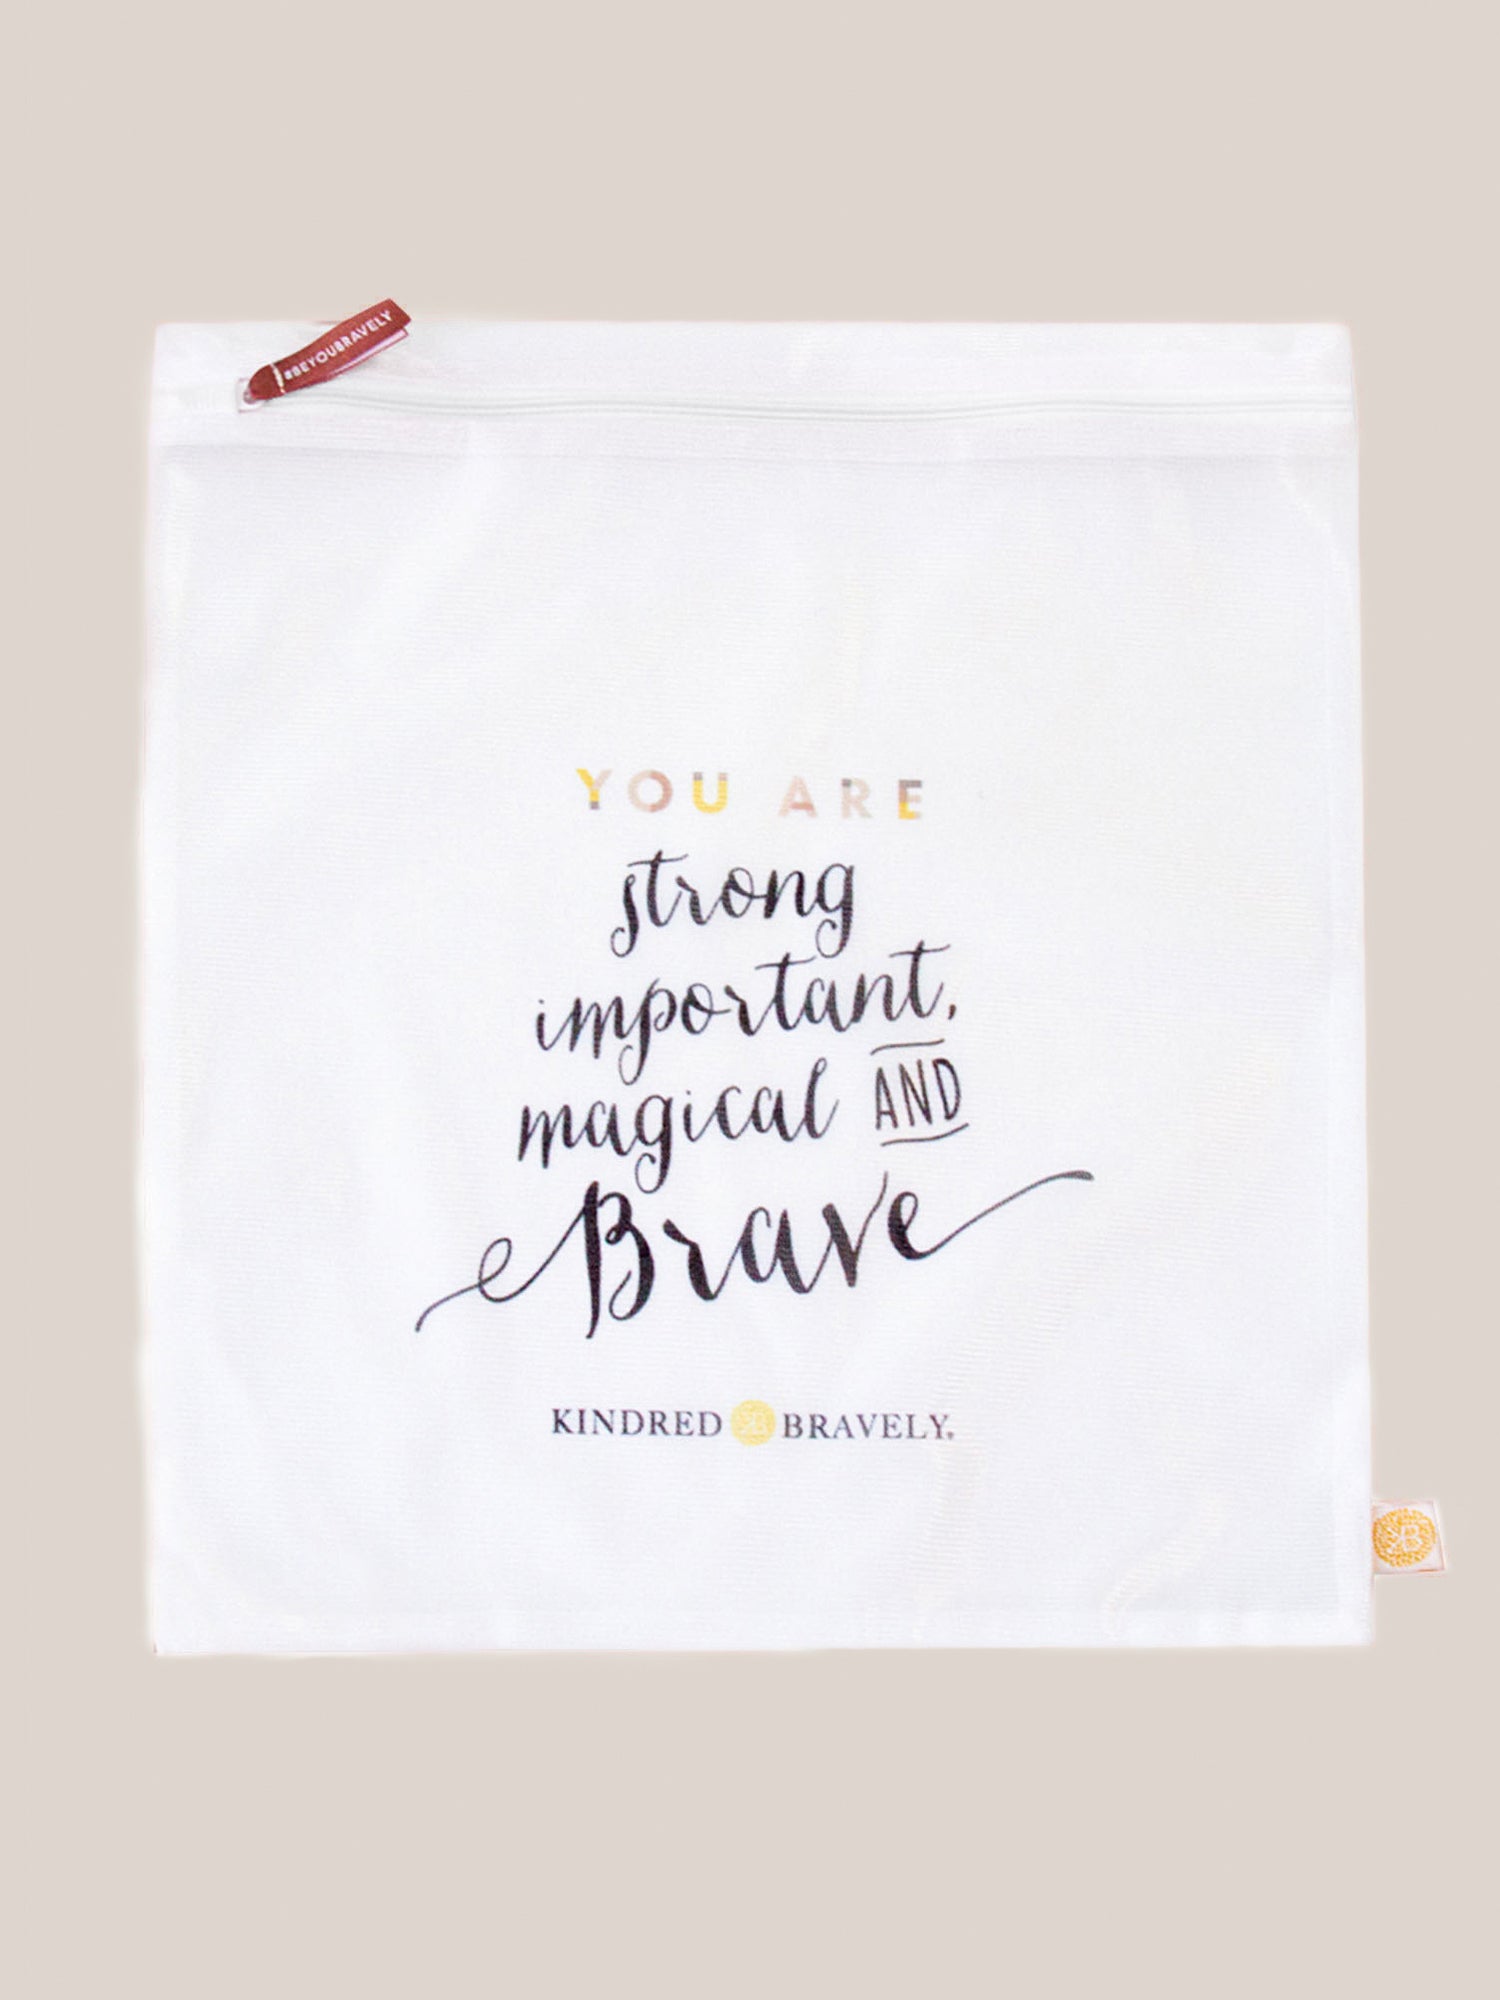 Image of the Mesh Lingerie Laundry bag against an off white background with a motivational saying